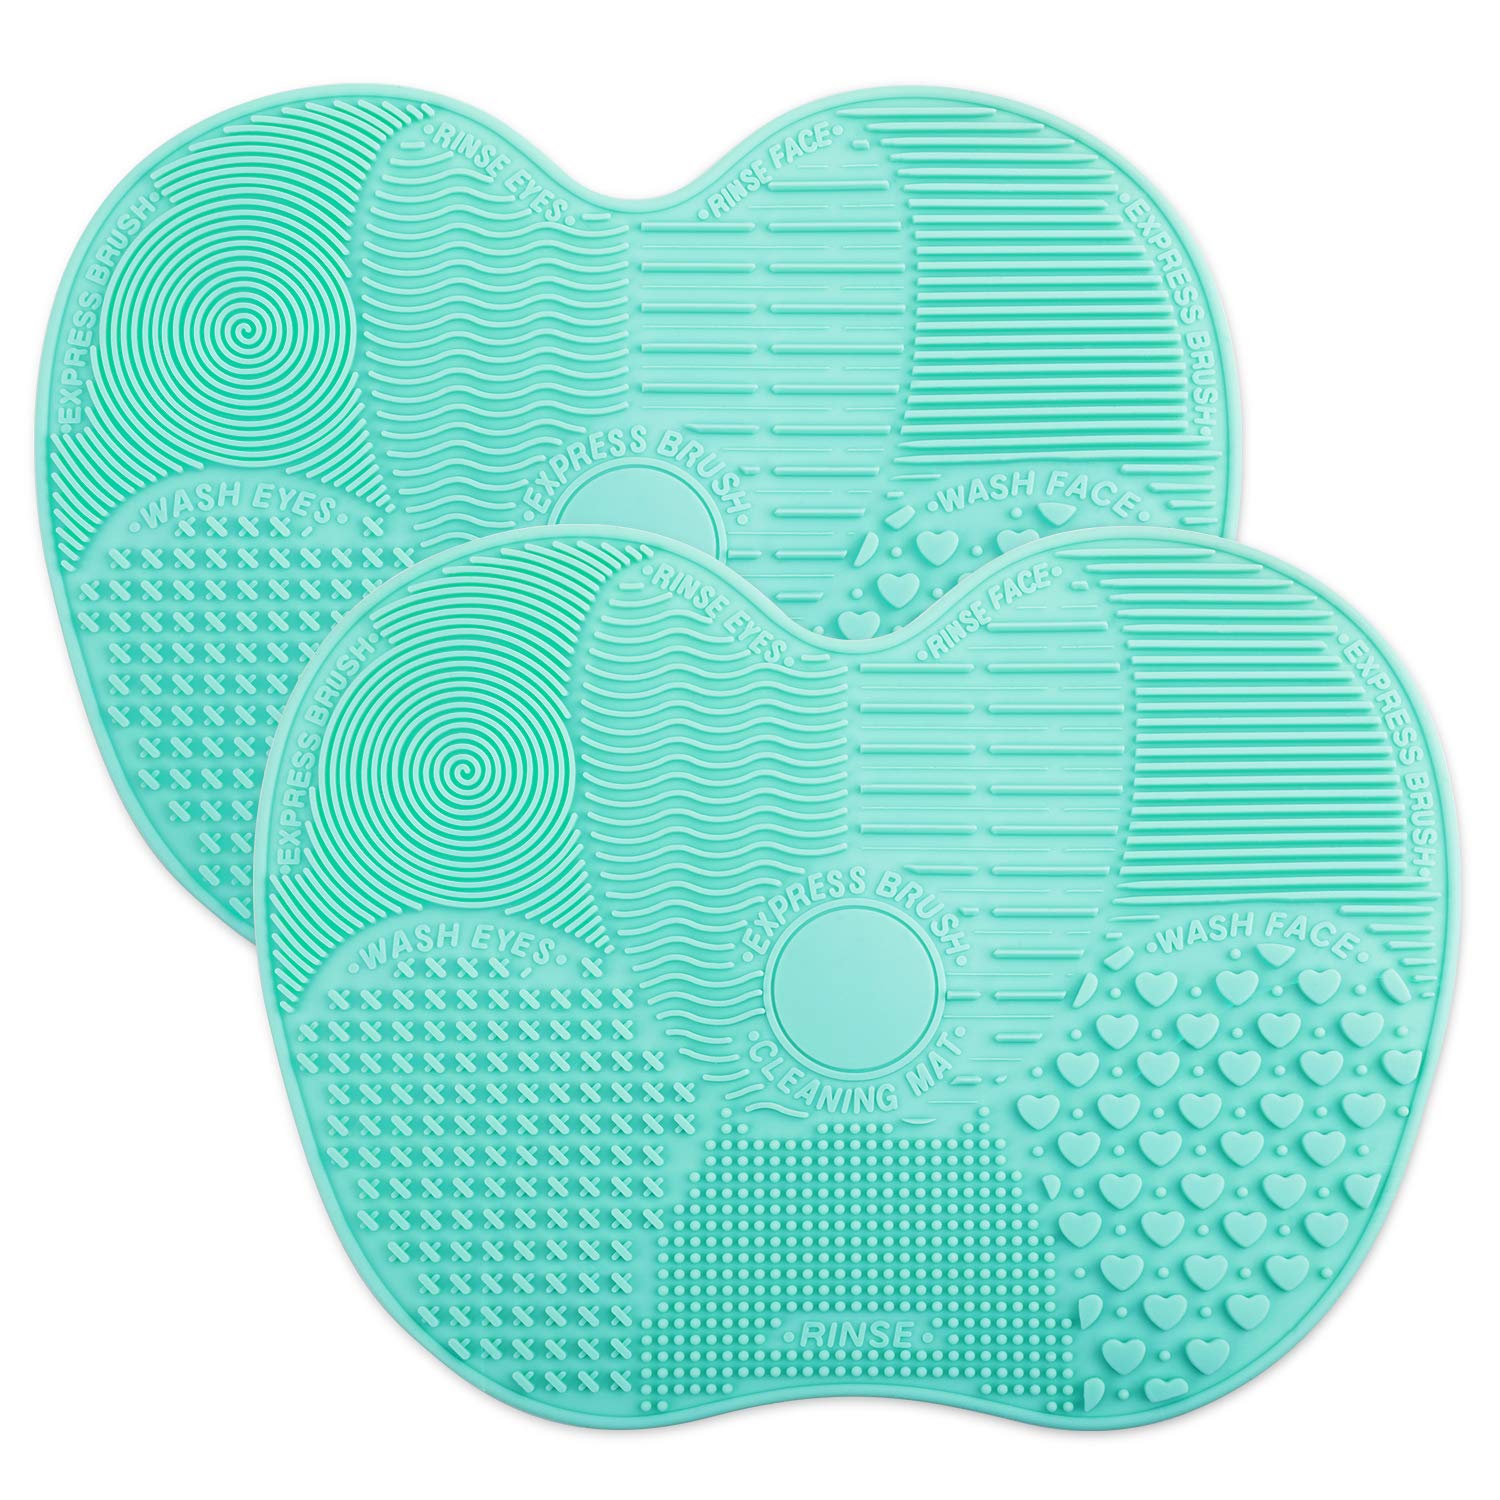 Easkep Suction Cup Makeup Brush Cleaning Mat, 2-Pack